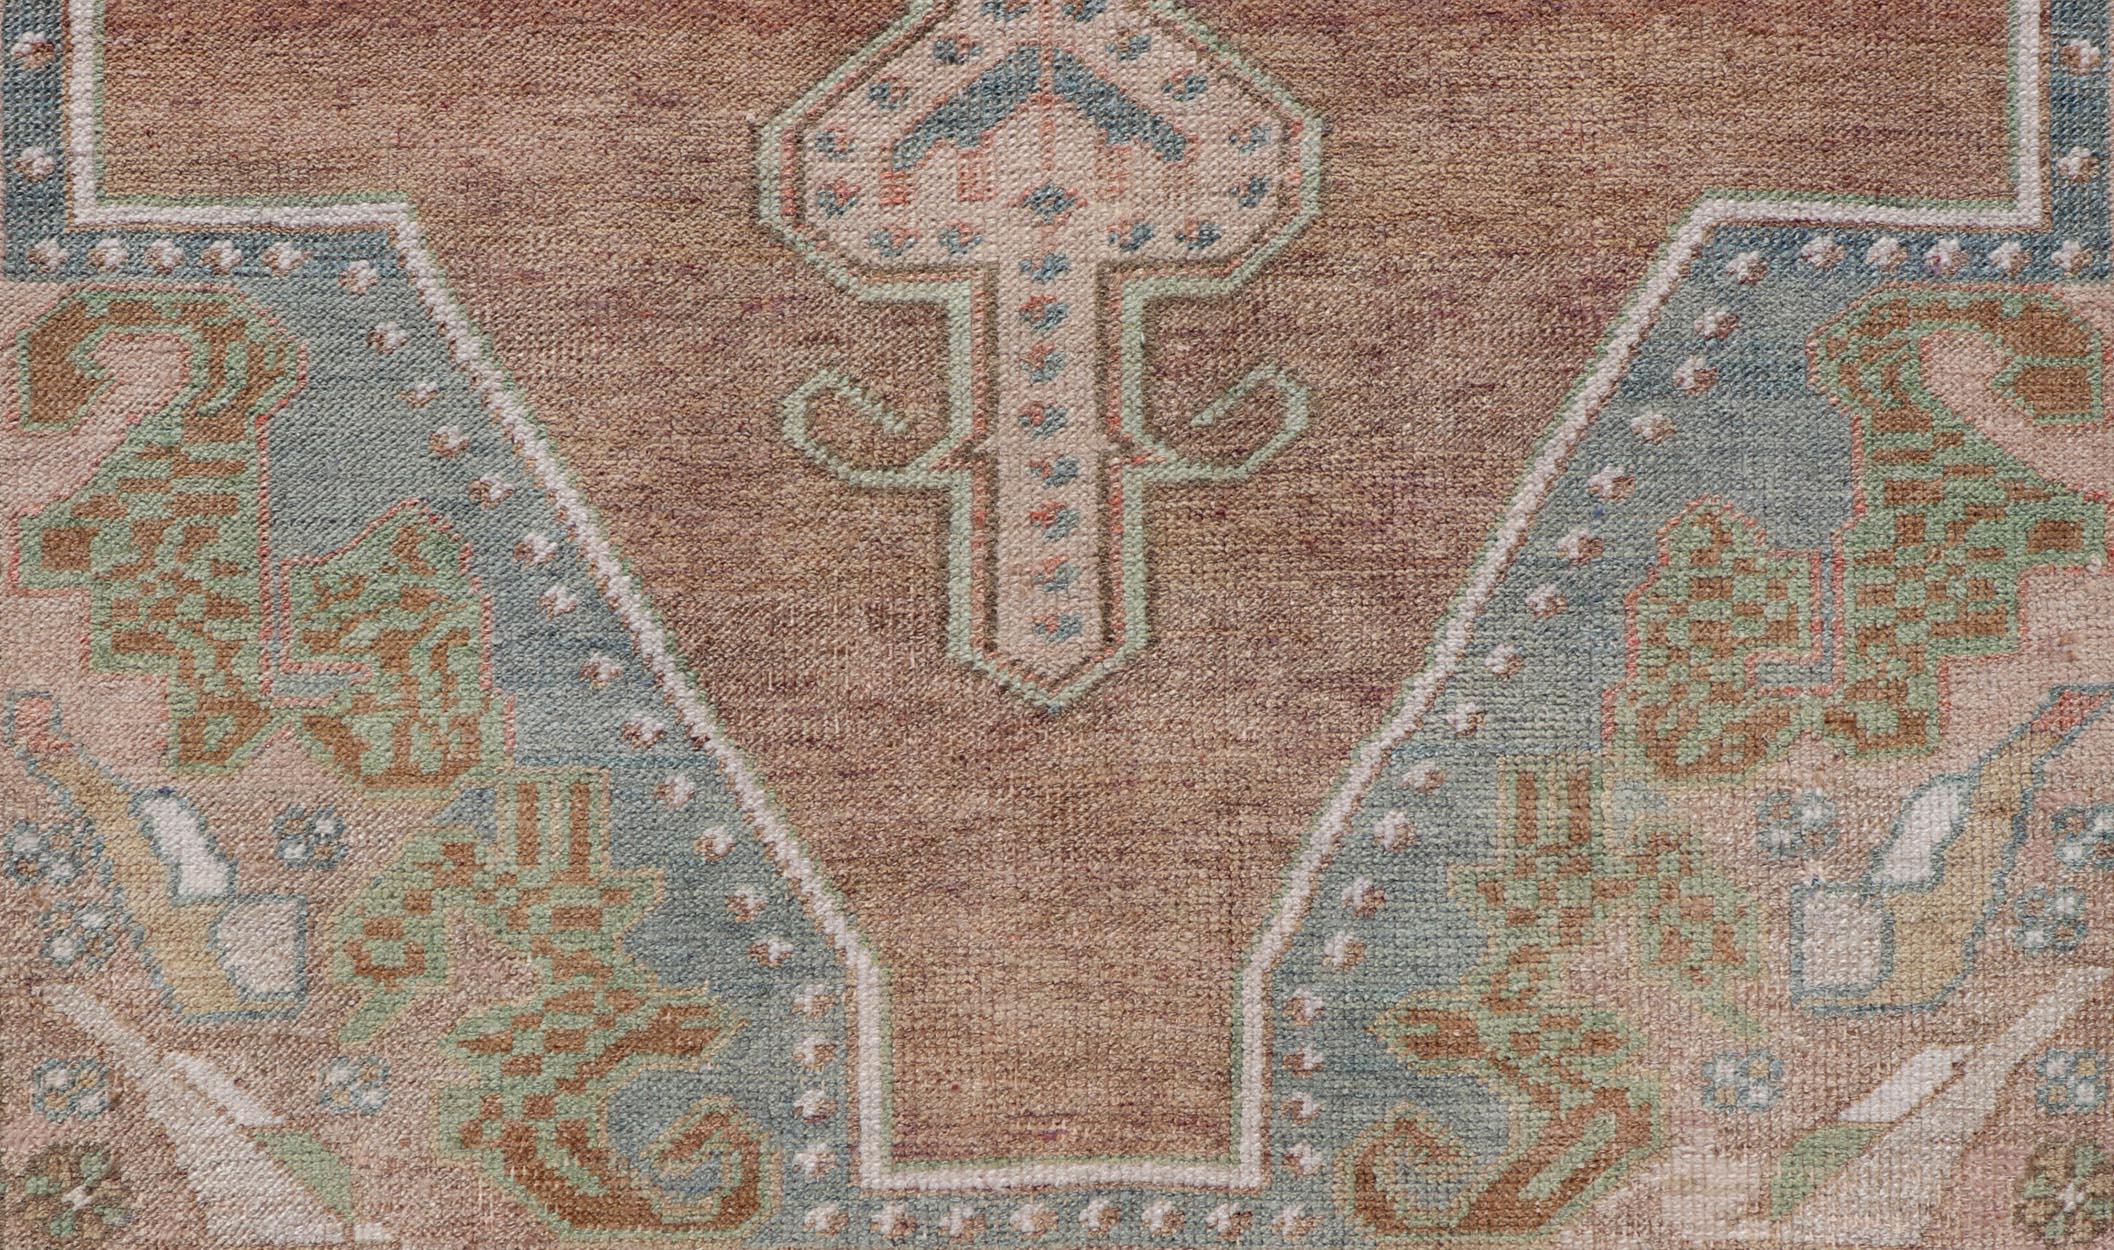 Vintage Oushak Rug in Light Brown Background and Cream, green, and Light Blue. Keivan Woven Arts / rug EN-15334, country of origin / type: Turkey / Oushak, circa Mid-20th century.
Measures: 3'5 x 6'1 
This vintage Turkish Oushak rug (circa